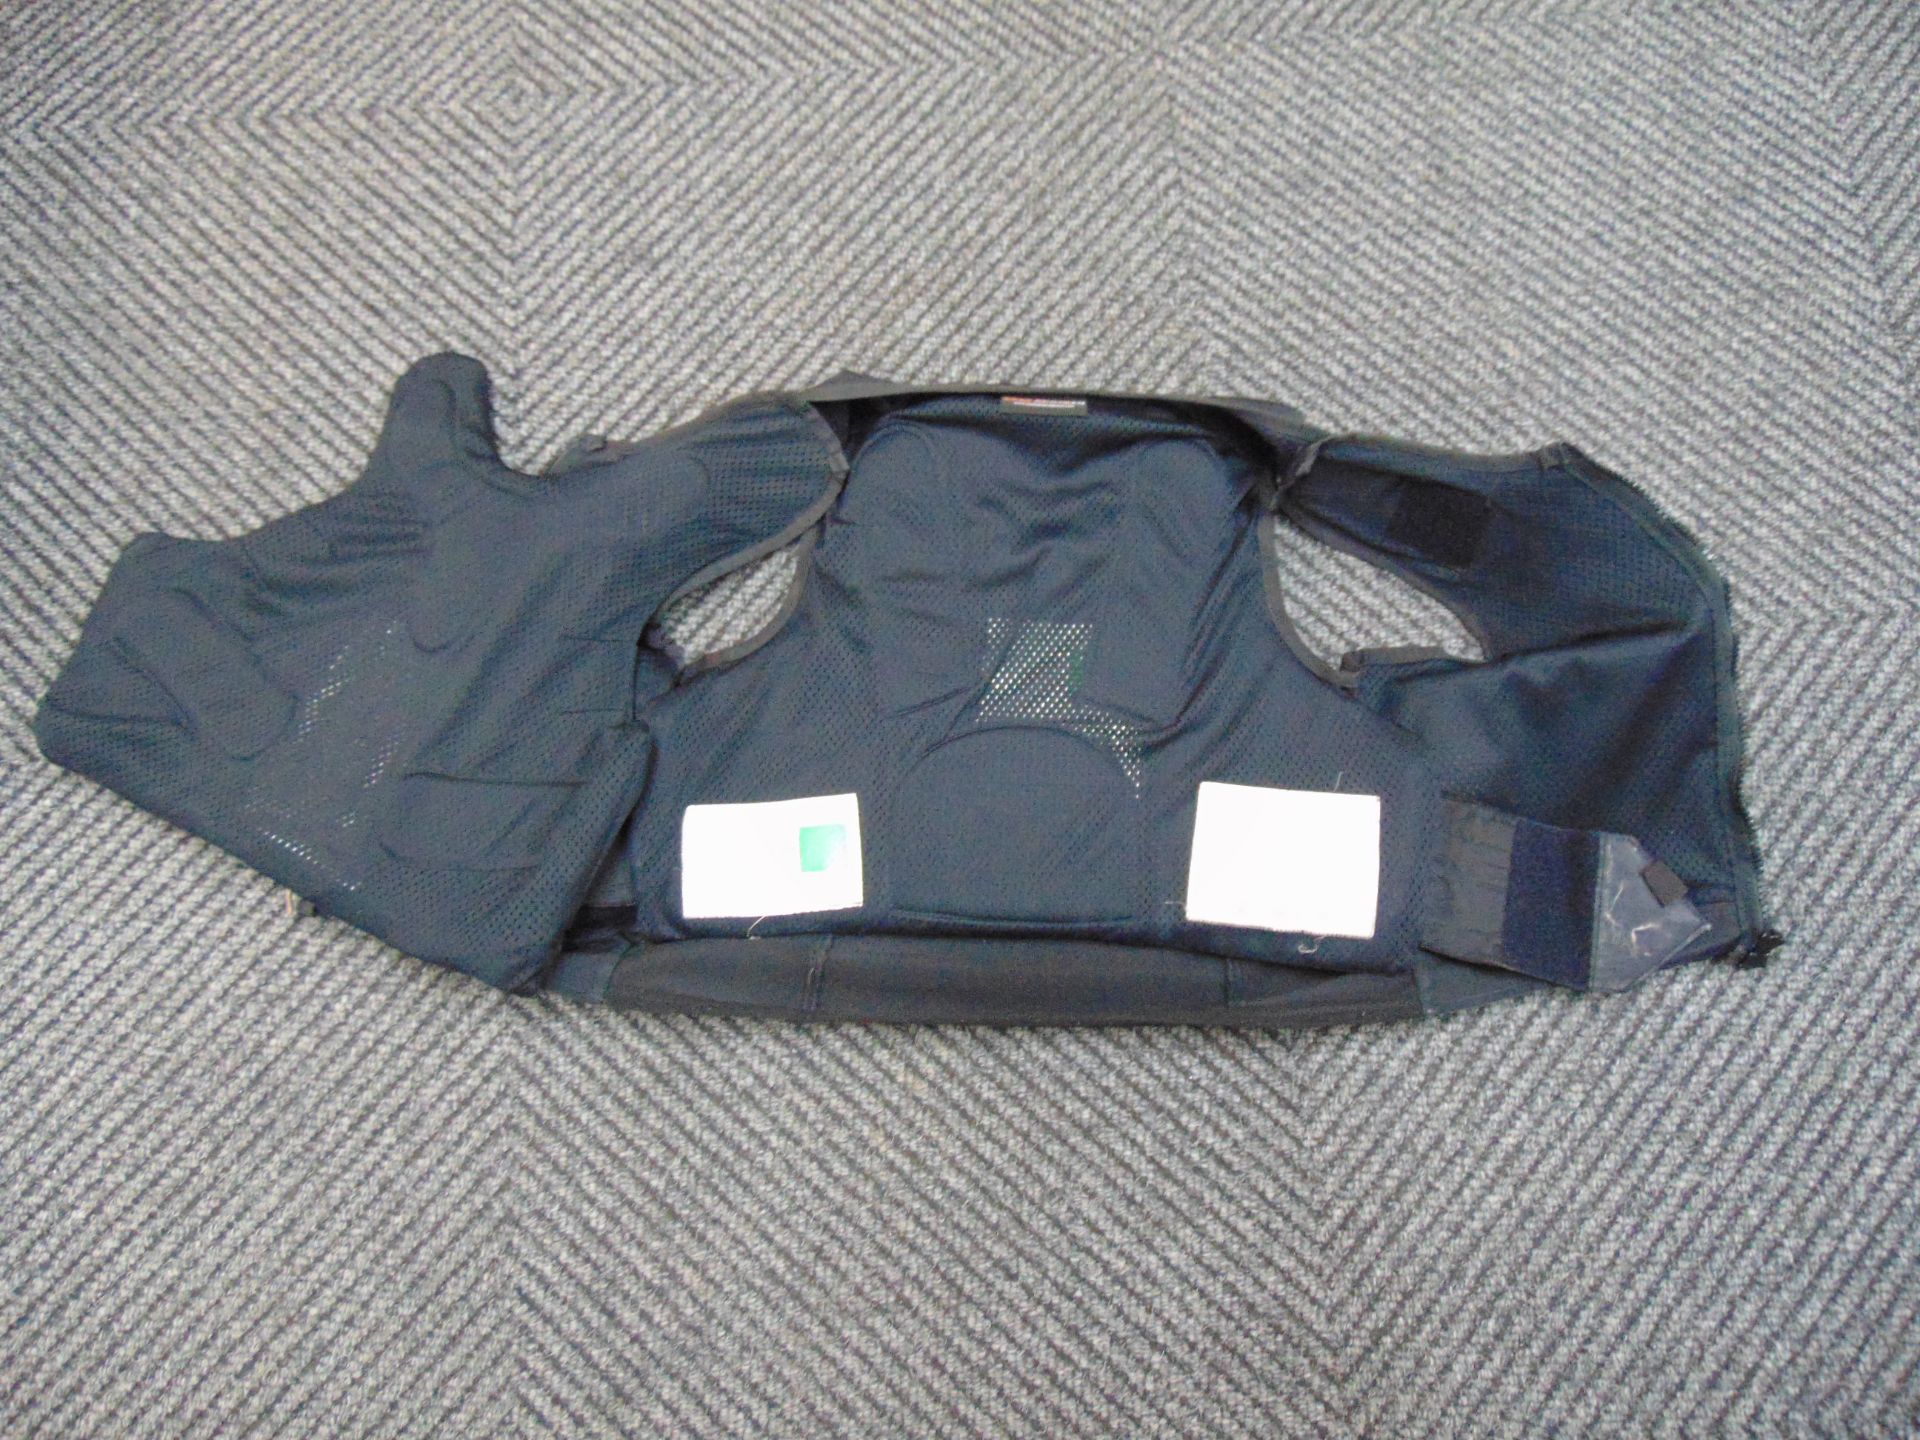 Cooneen Protection Body Armour Stab Vest - Image 3 of 5